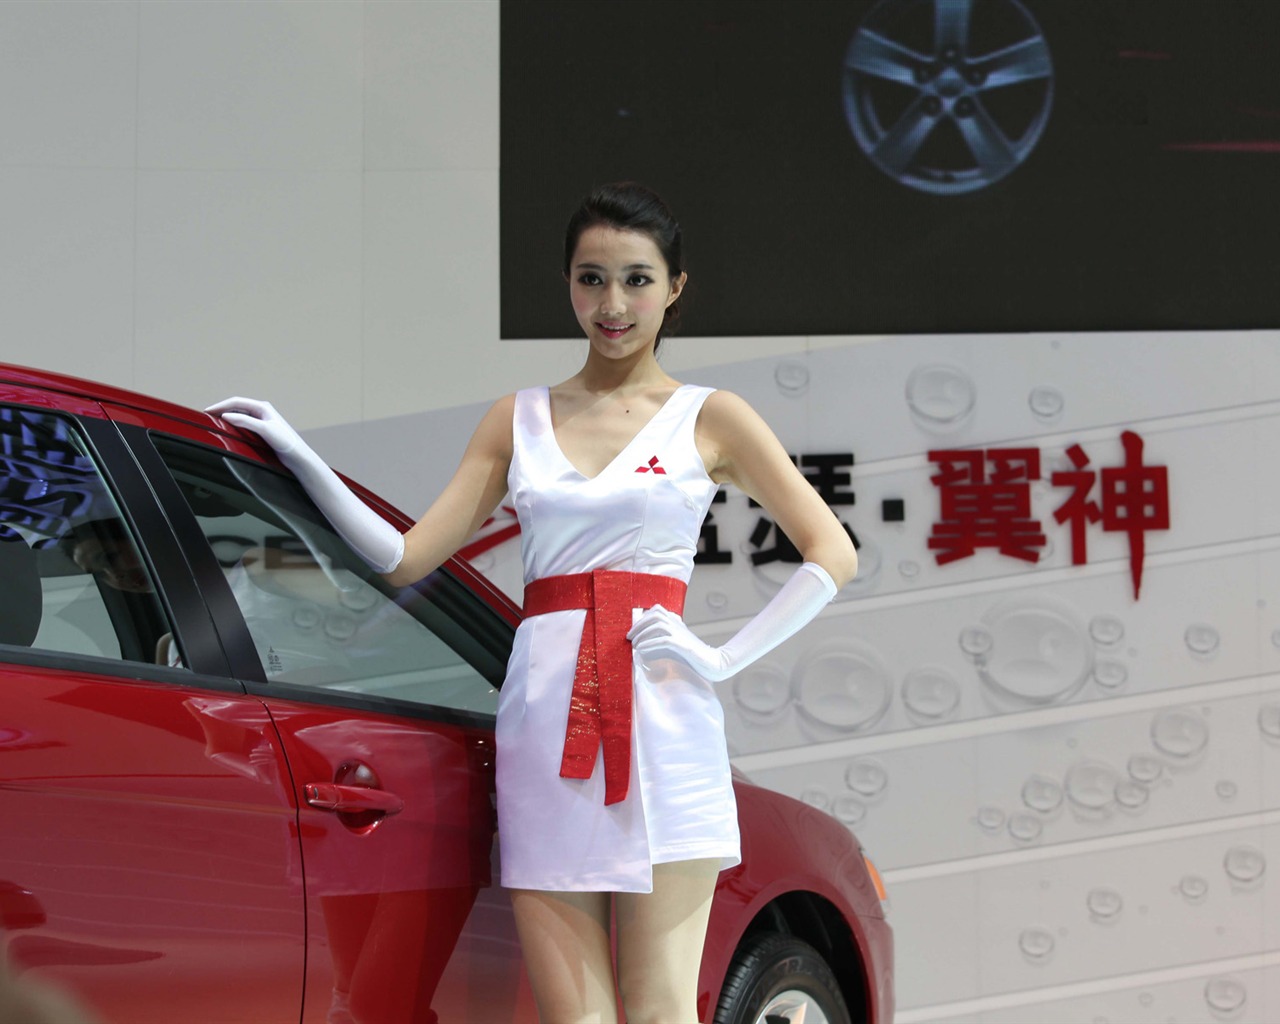 2010 Beijing International Auto Show beauty (2) (the wind chasing the clouds works) #30 - 1280x1024